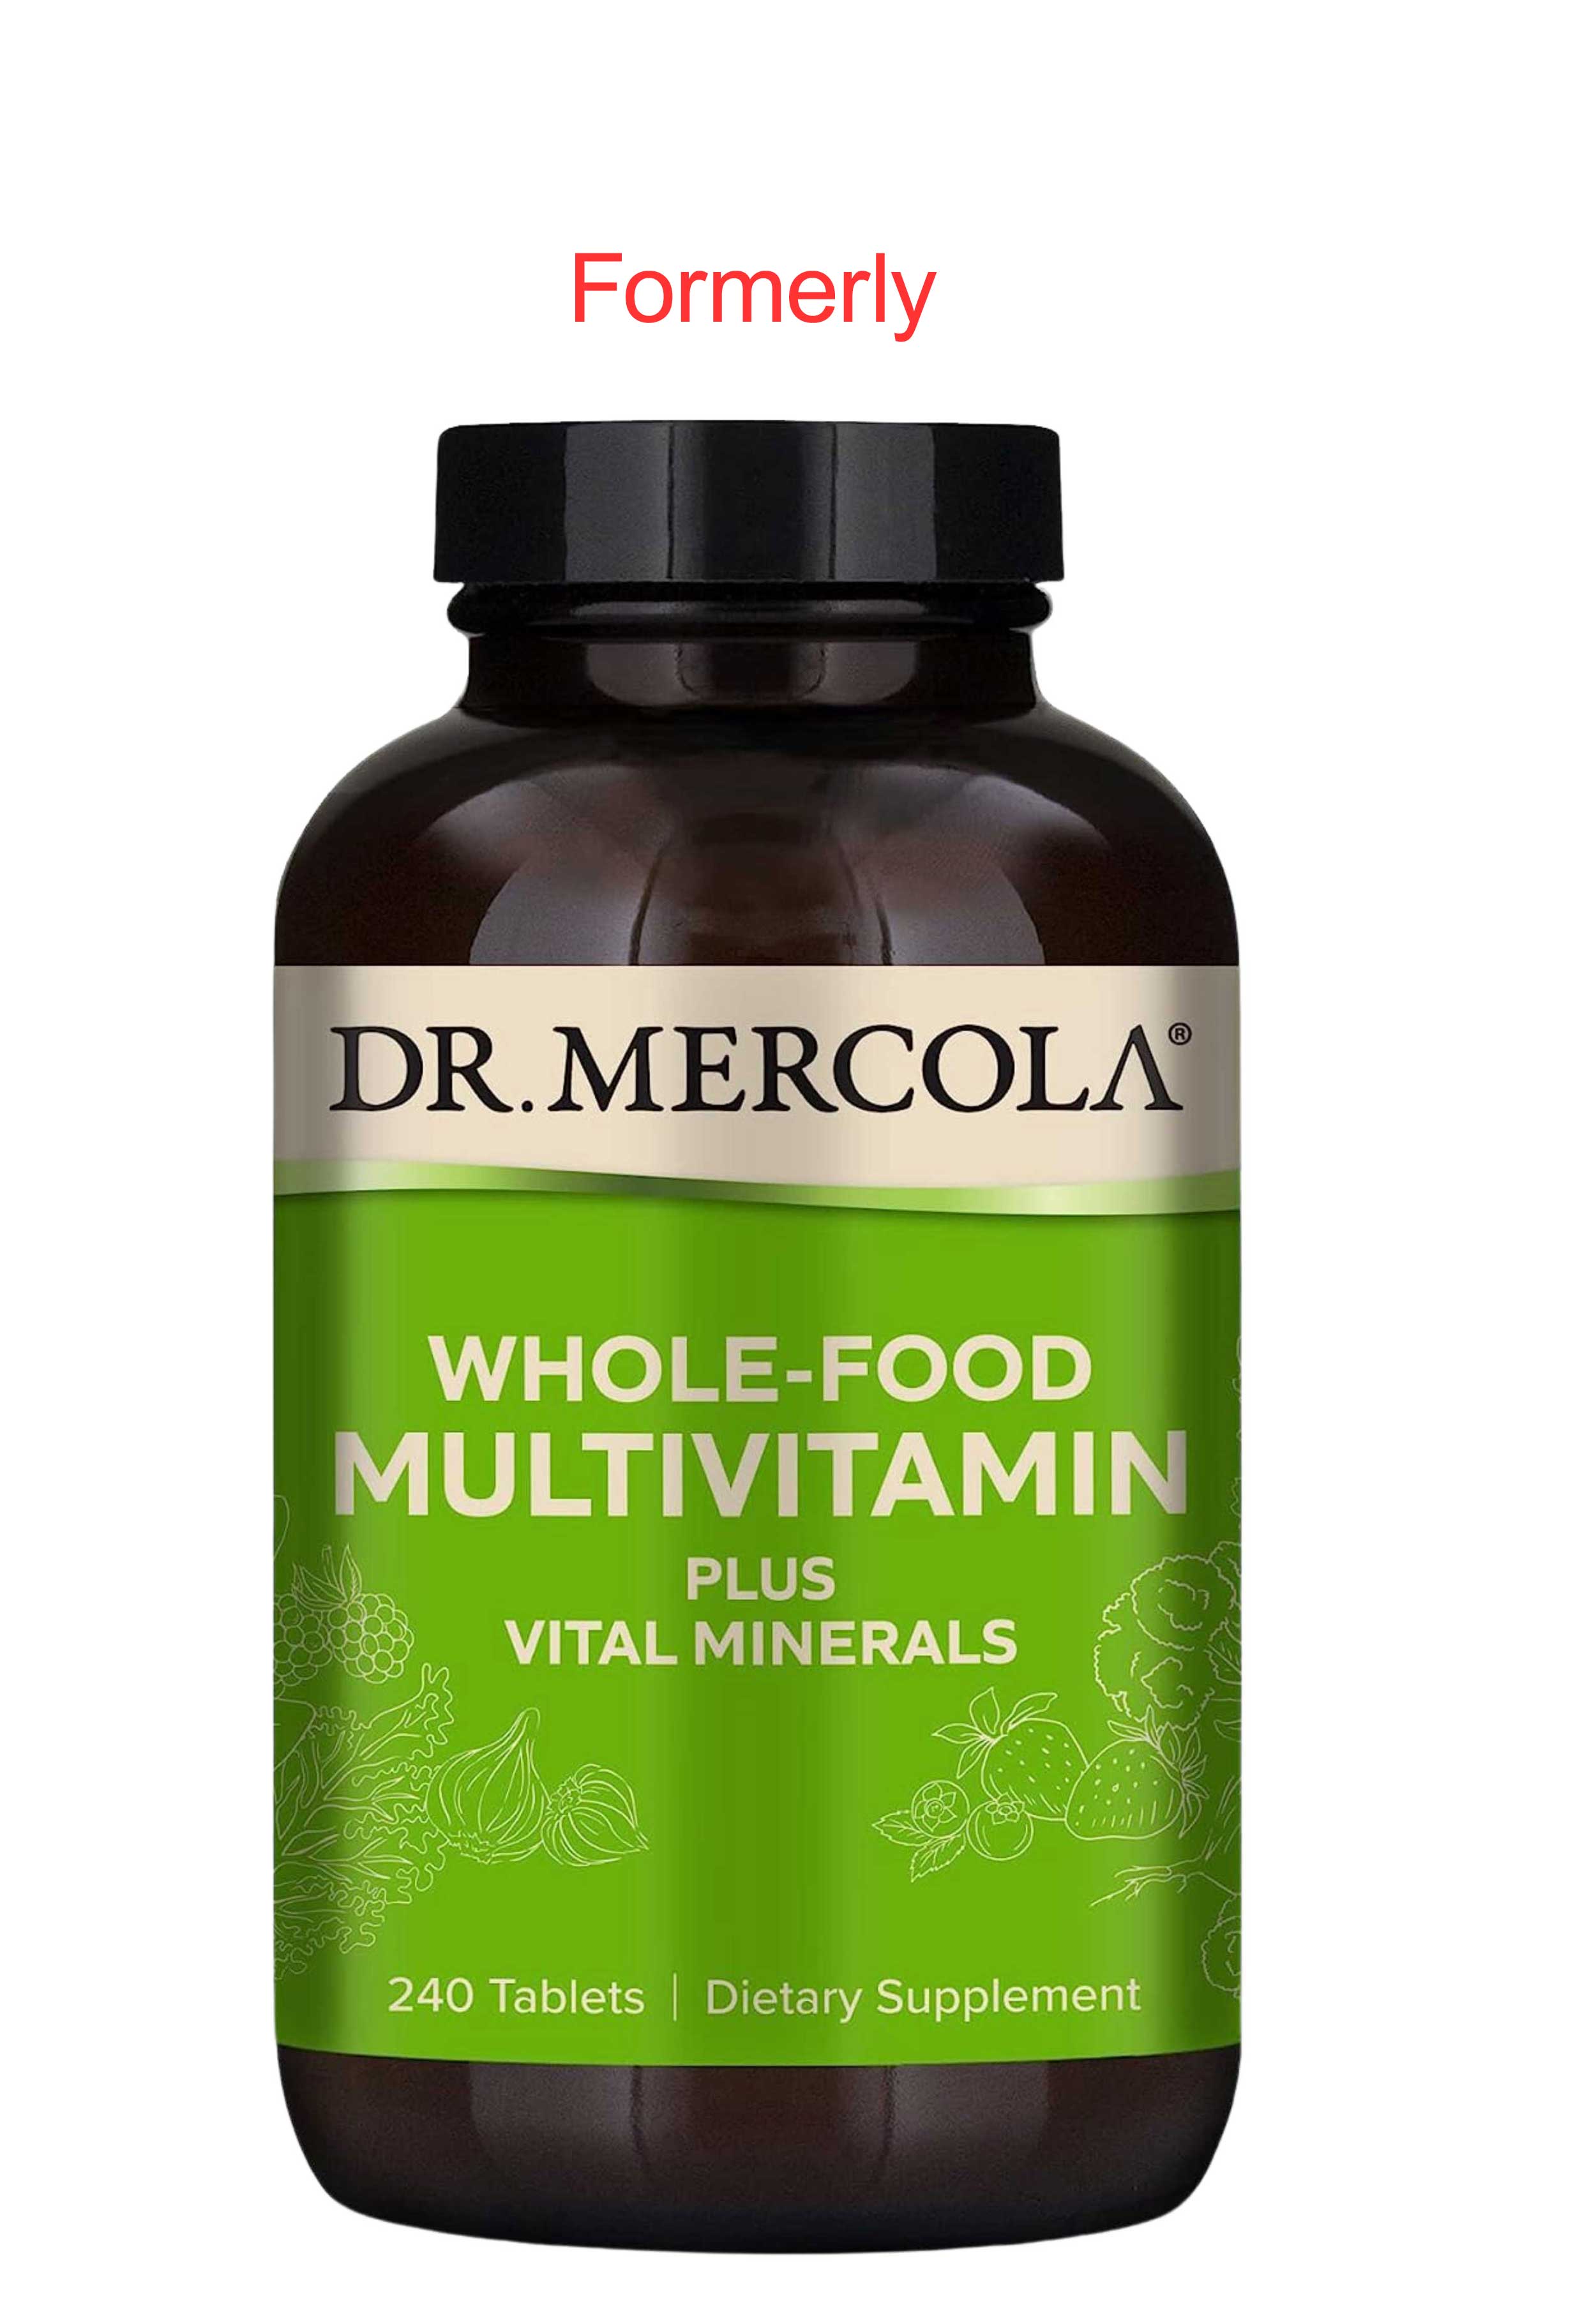 Dr. Mercola Whole Food Complex (FormerlyWhole Food Multivitamin Plus) Formerly